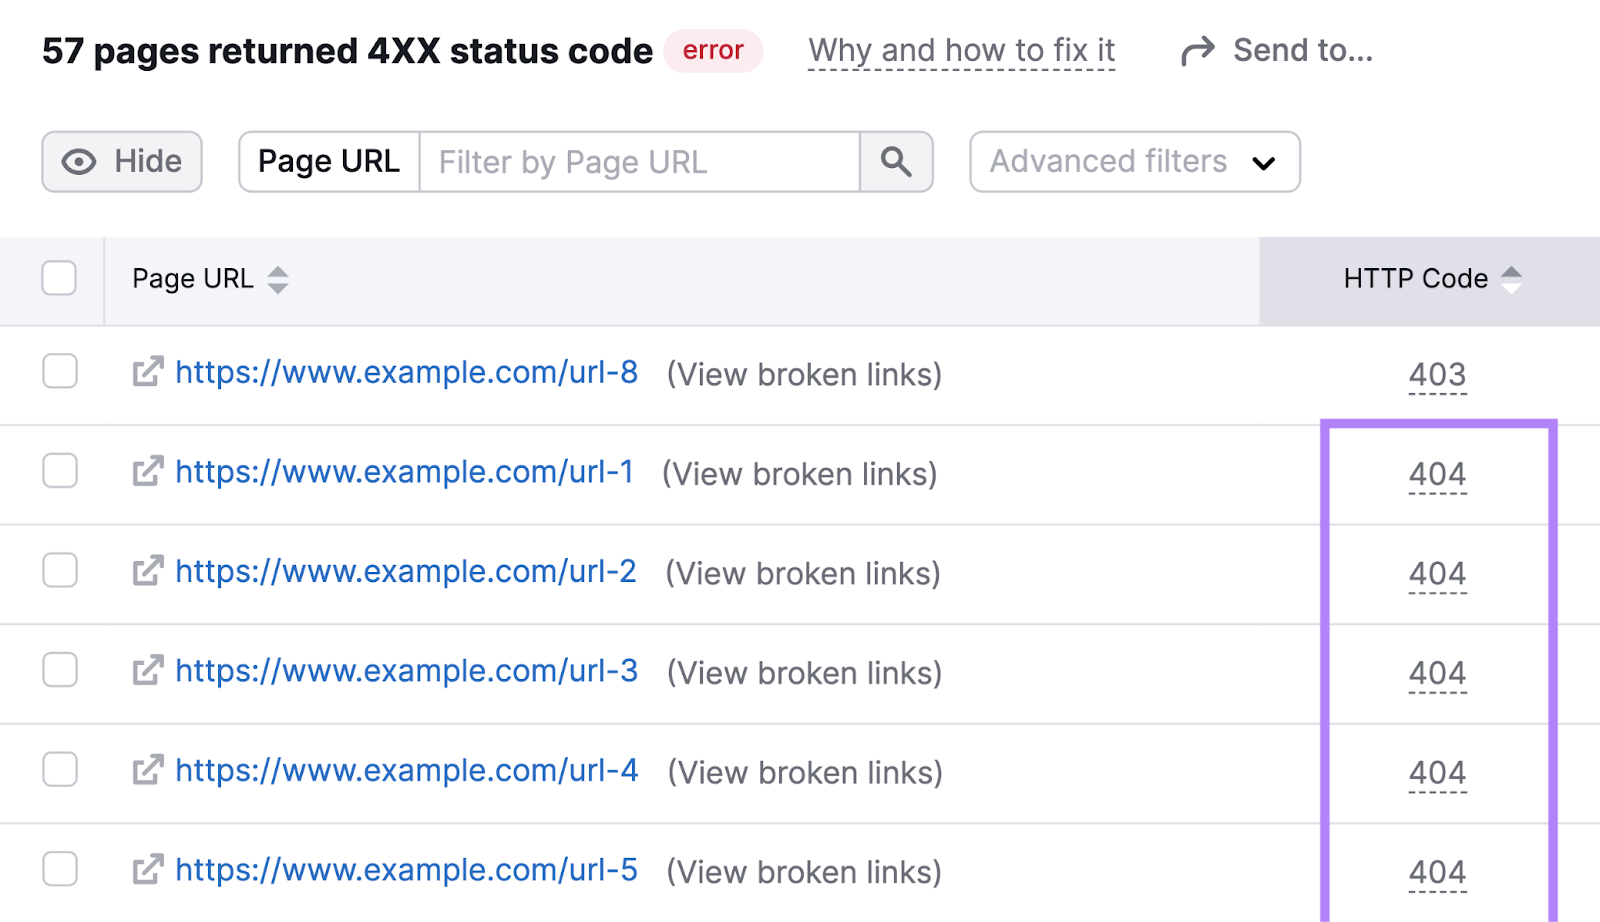 A list of all page URLs leading to 404 errors